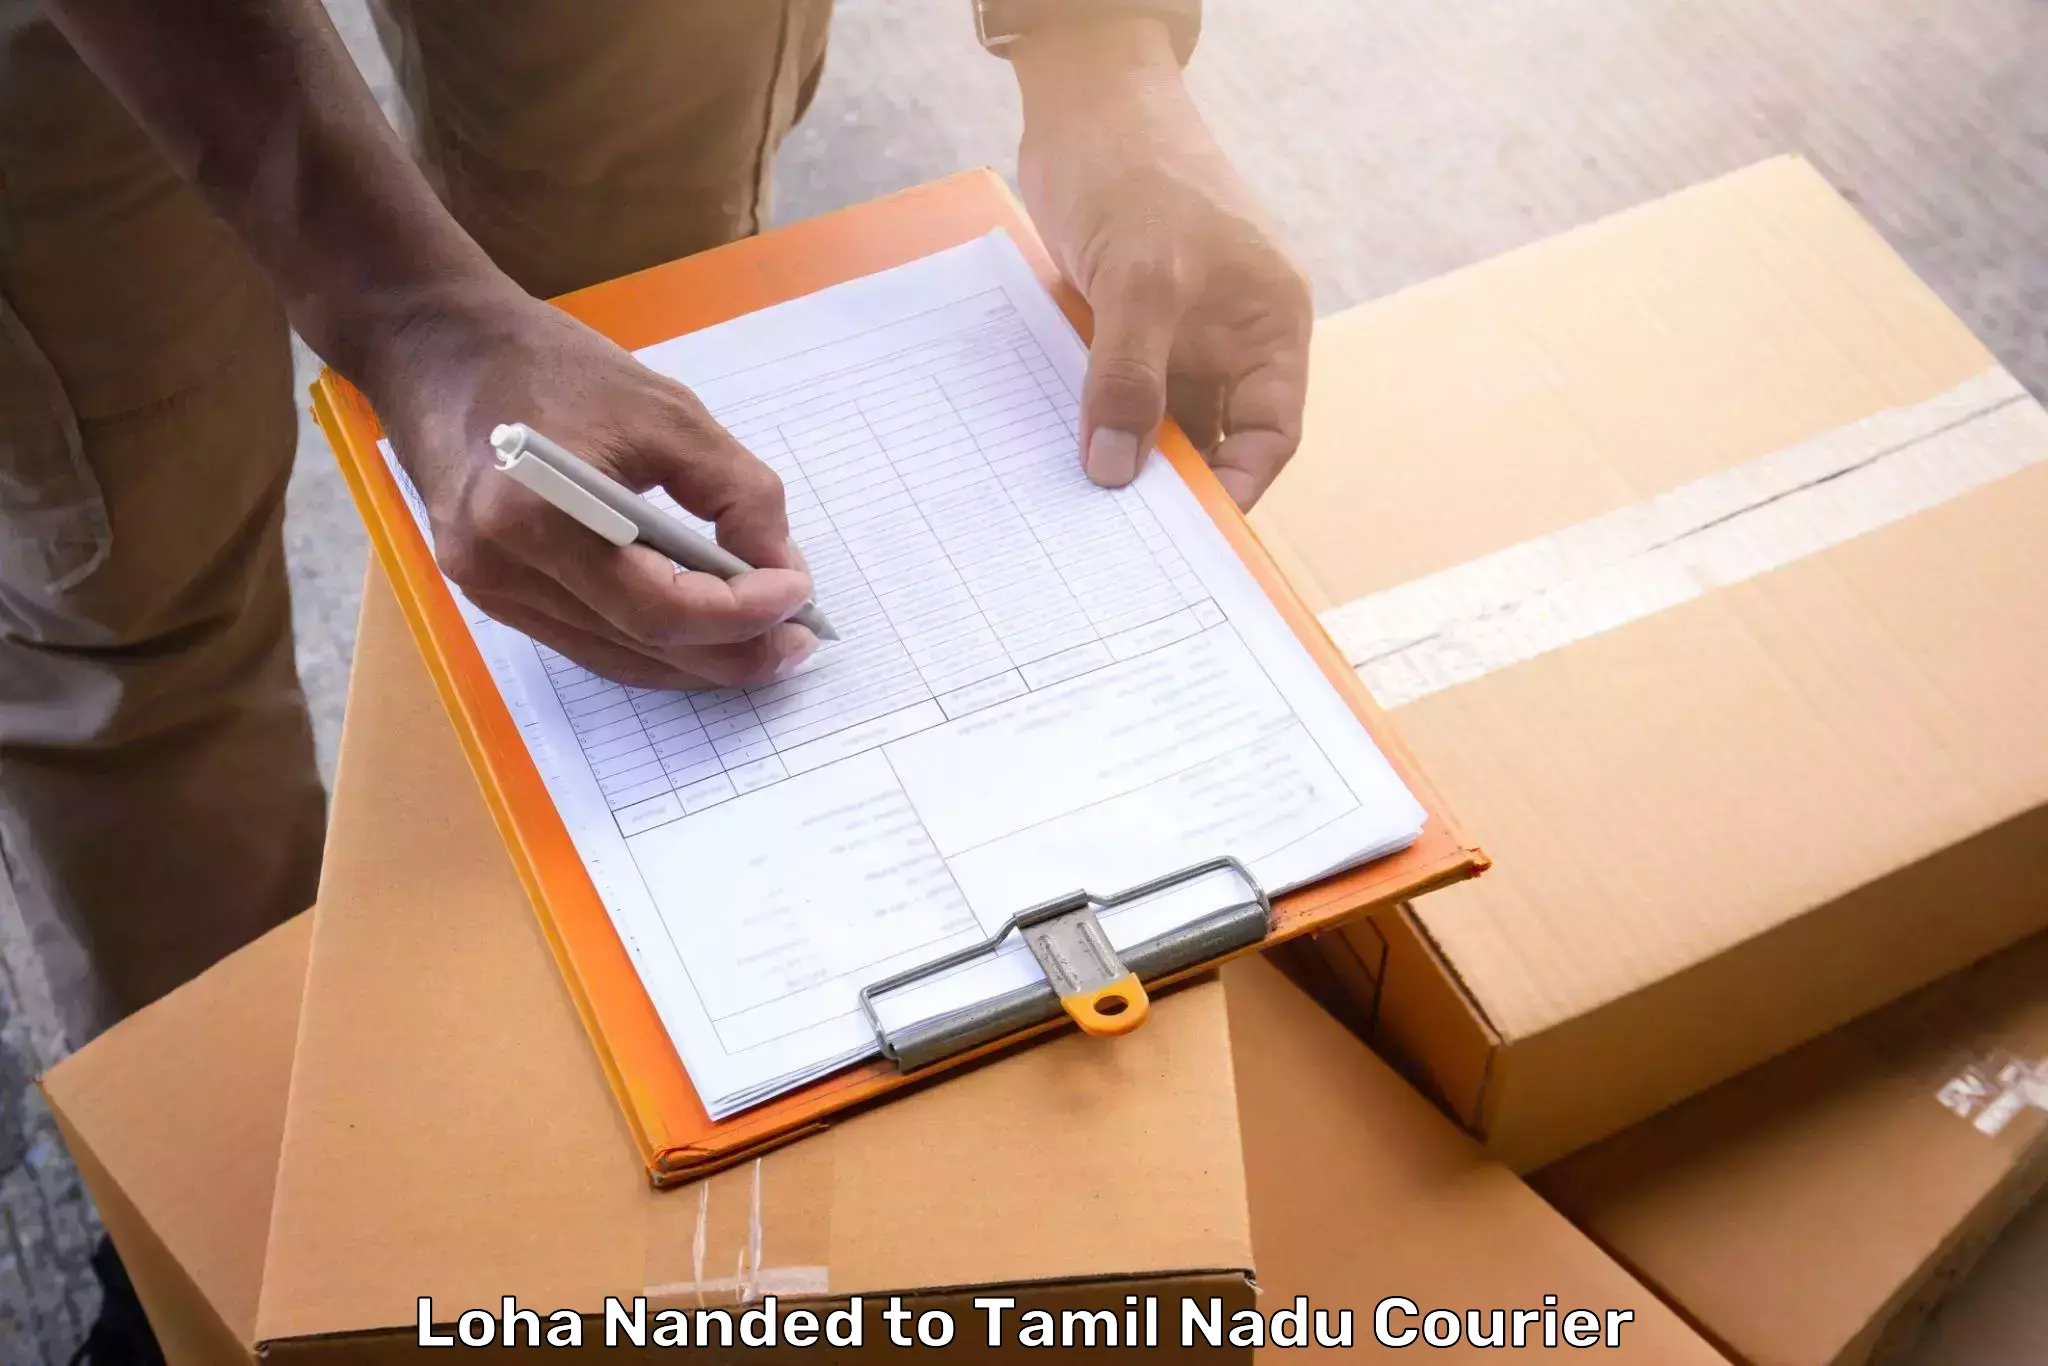 Door-to-door baggage service Loha Nanded to Ennore Port Chennai